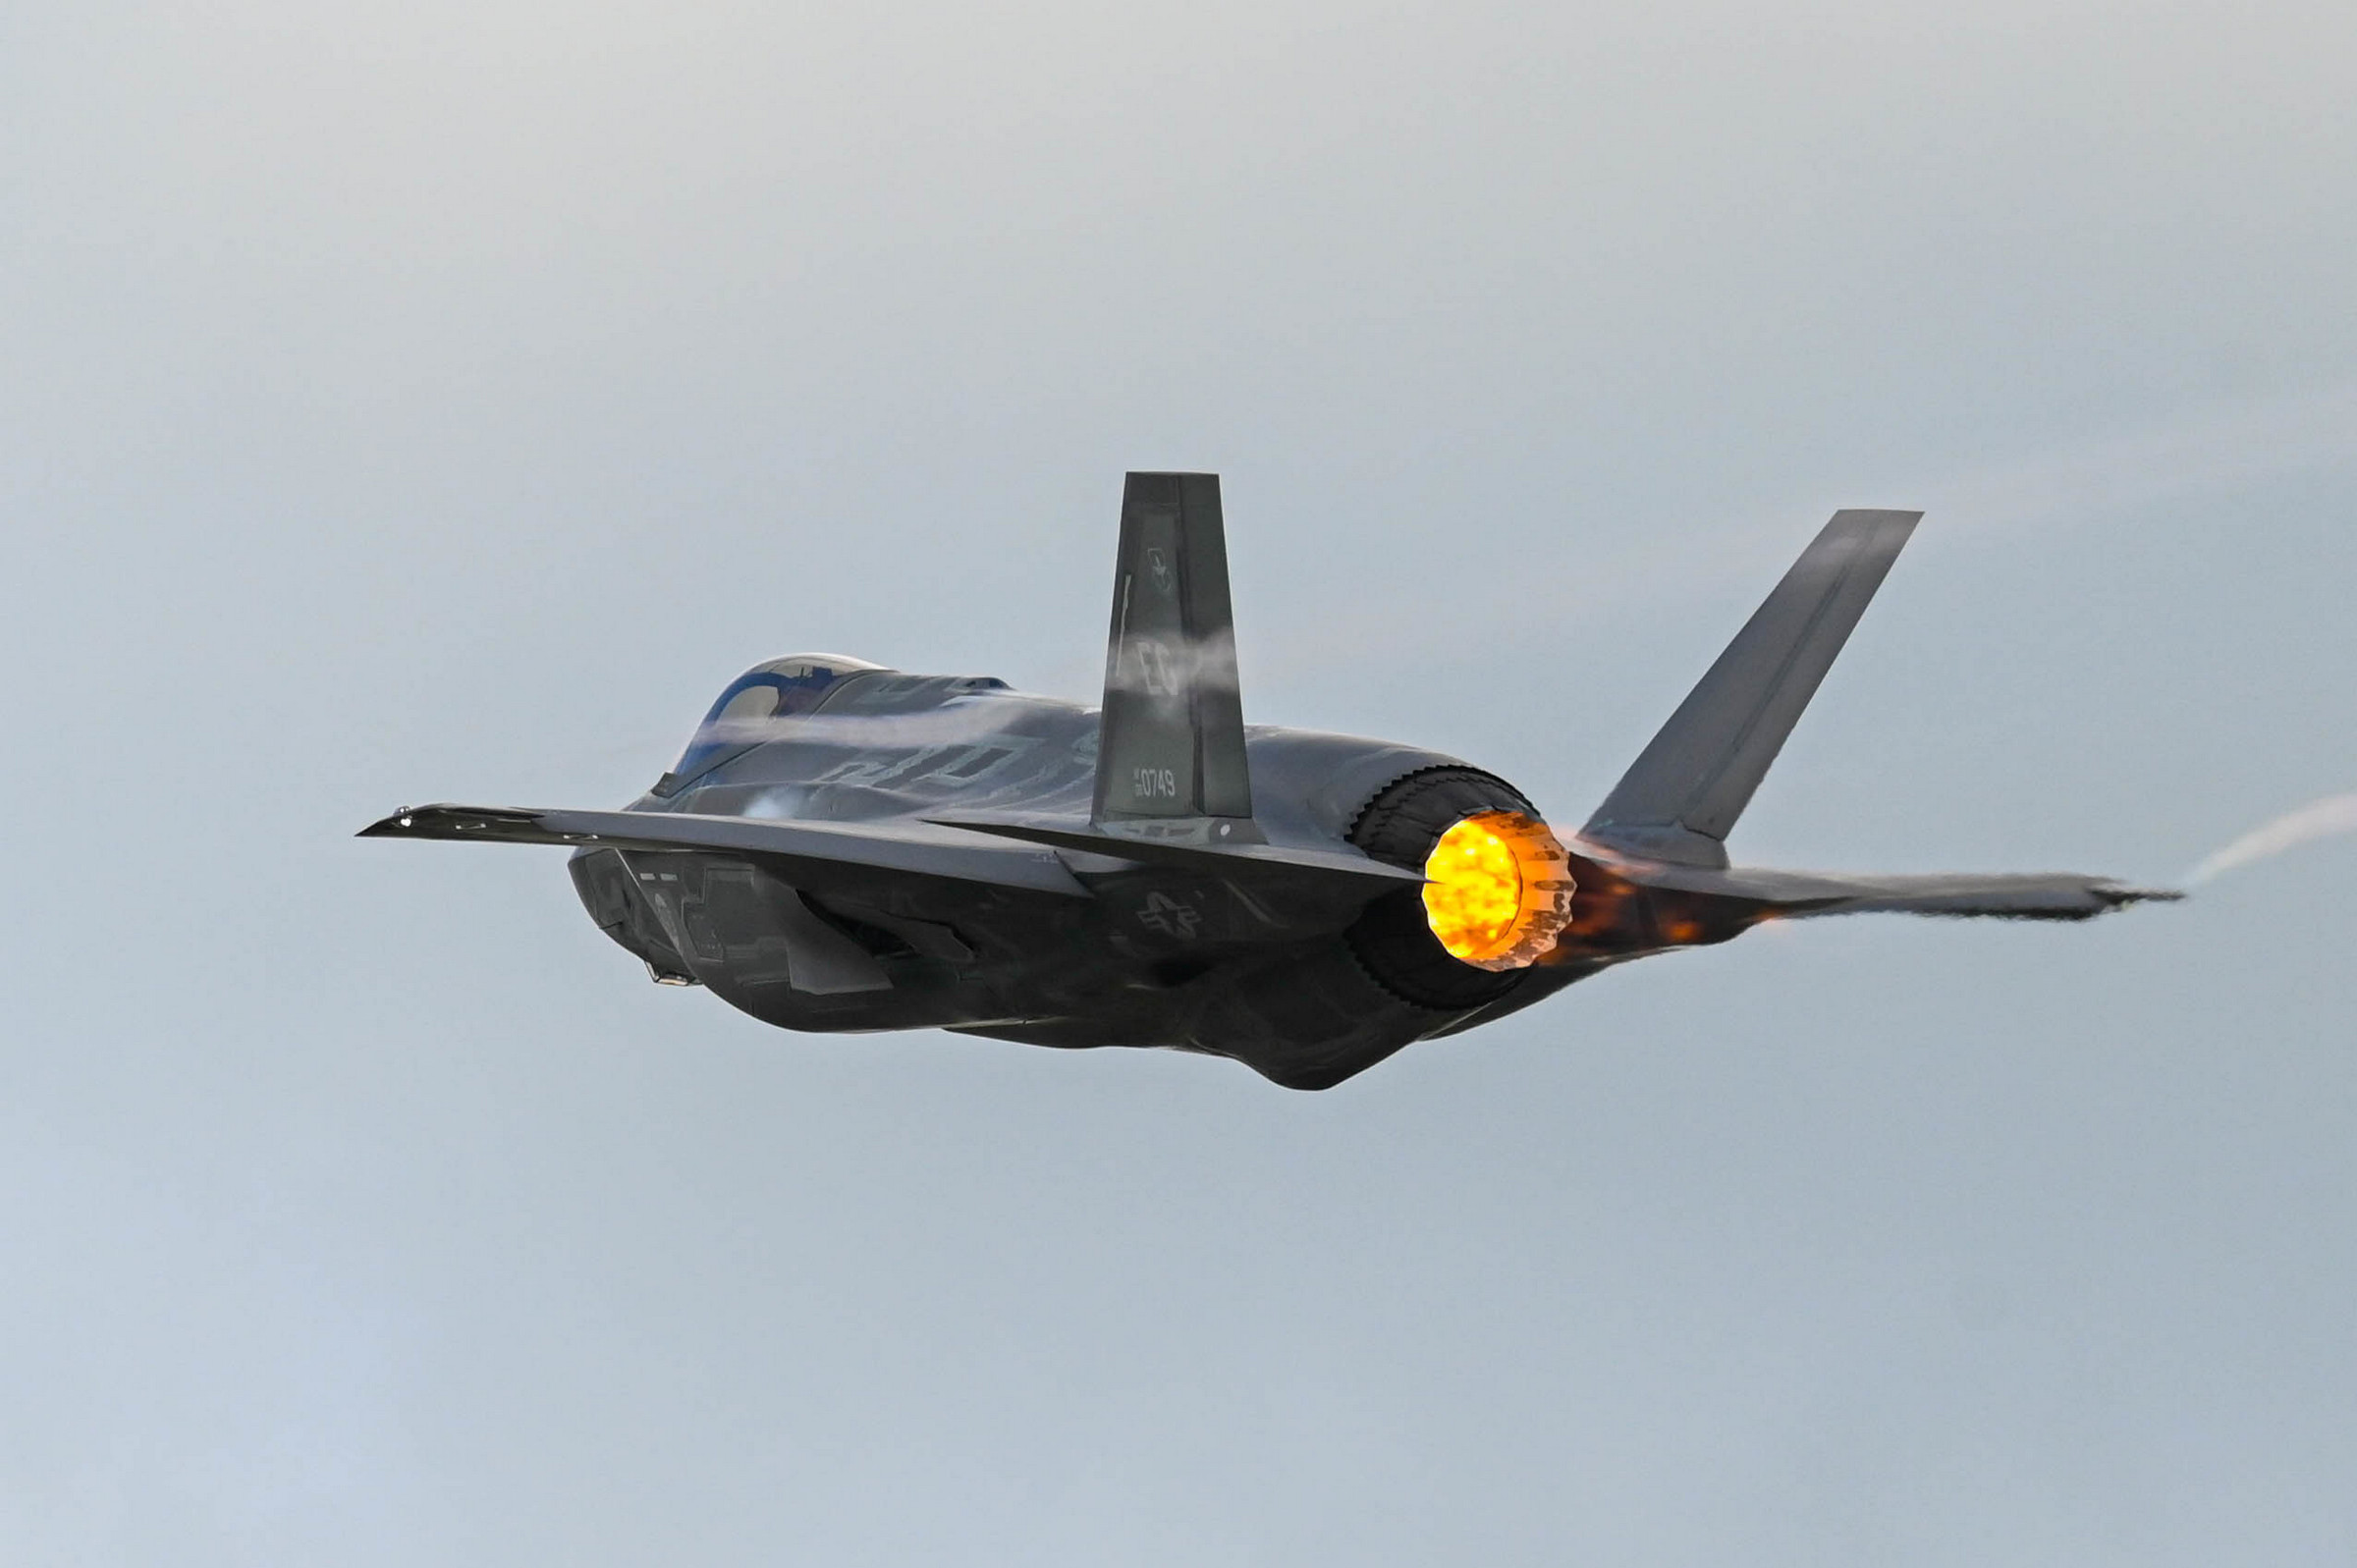 A U.S. Air Force F-35A Lightning II from the 58th Fighter Squadron, 33rd Fighter Wing, Eglin Air Force Base, Florida, takes off for a training mission during Northern Lightning at Volk Field Air National Guard Base, Wisconsin, Aug. 15, 2022. Volk Field offers open airspace with optimal weather conditions for flying, allowing the 33rd FW to avoid over 60% of seasonal lightning and hurricane delays in Florida. (U.S. Air Force photo by Airman Christian Corley)